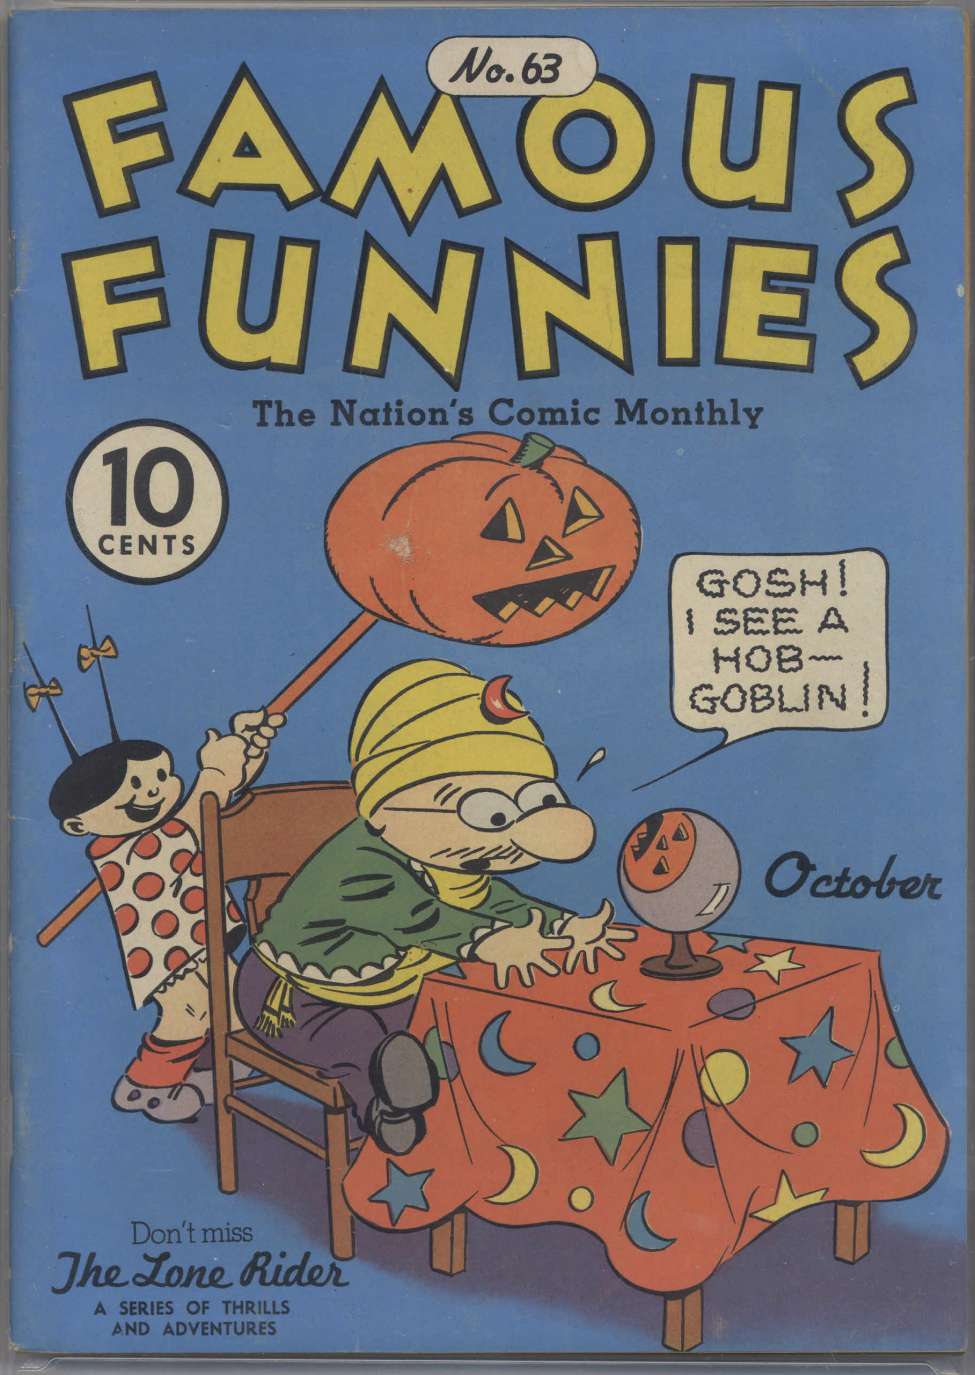 Book Cover For Famous Funnies 63 - Version 1